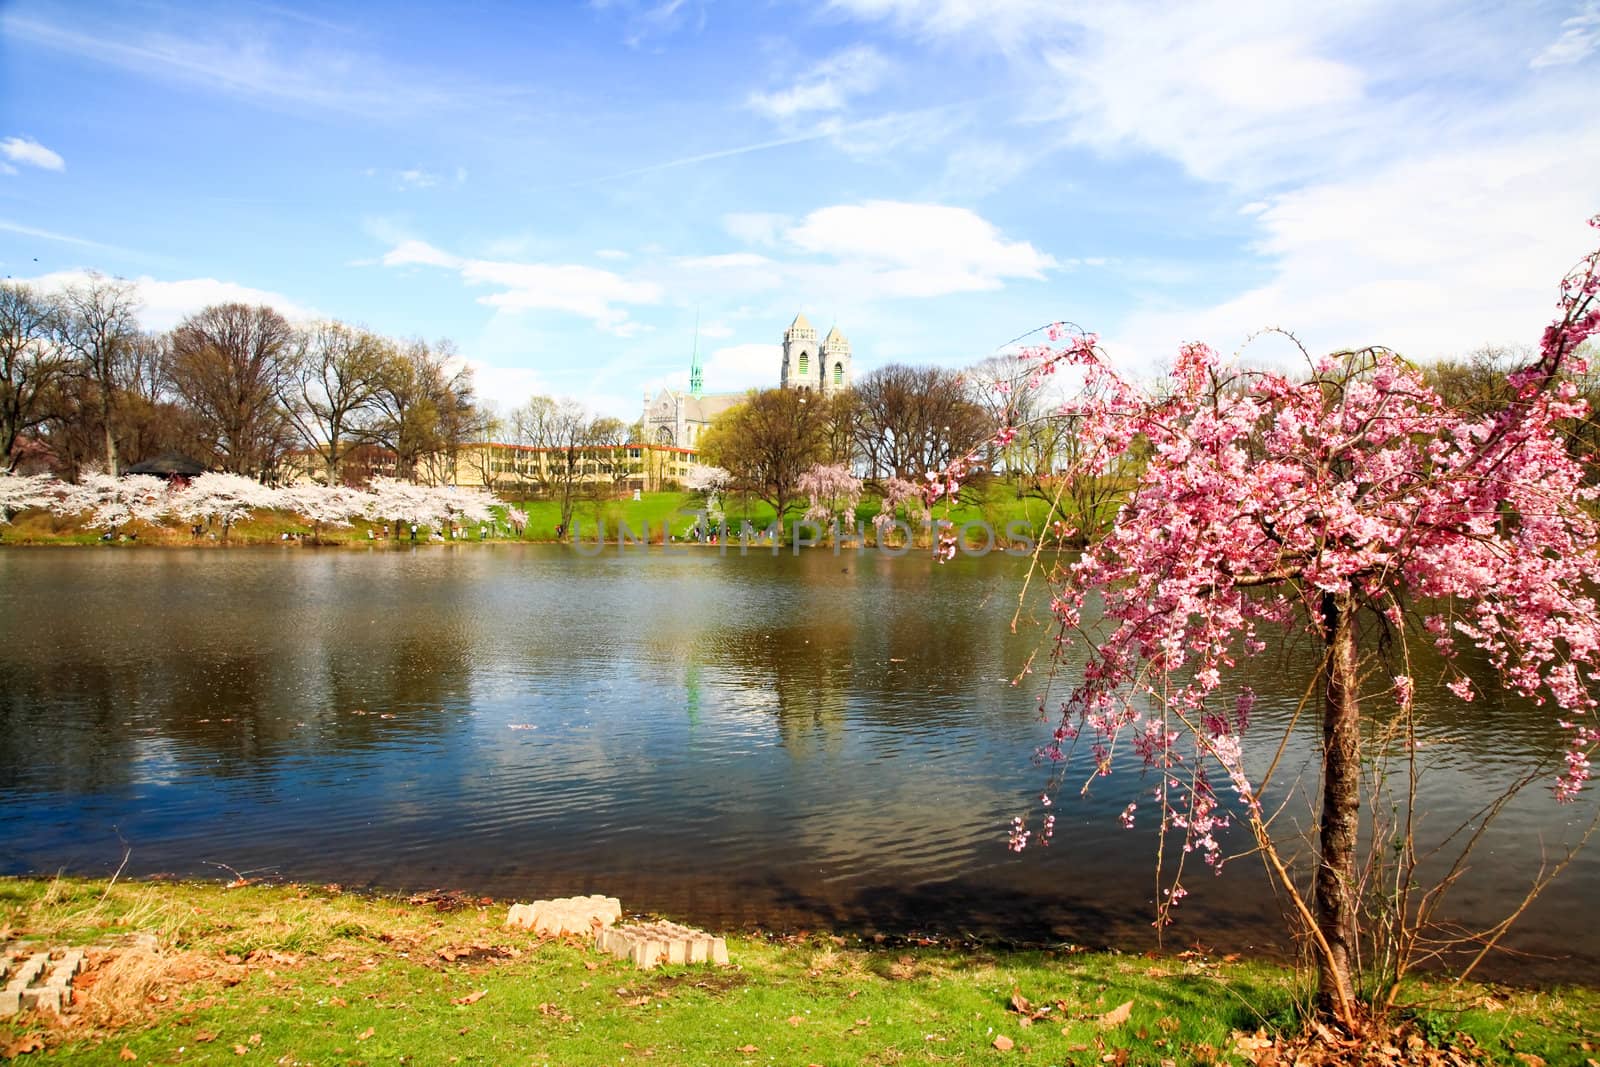 The Cherry Blossom Festival in New Jersey by gary718